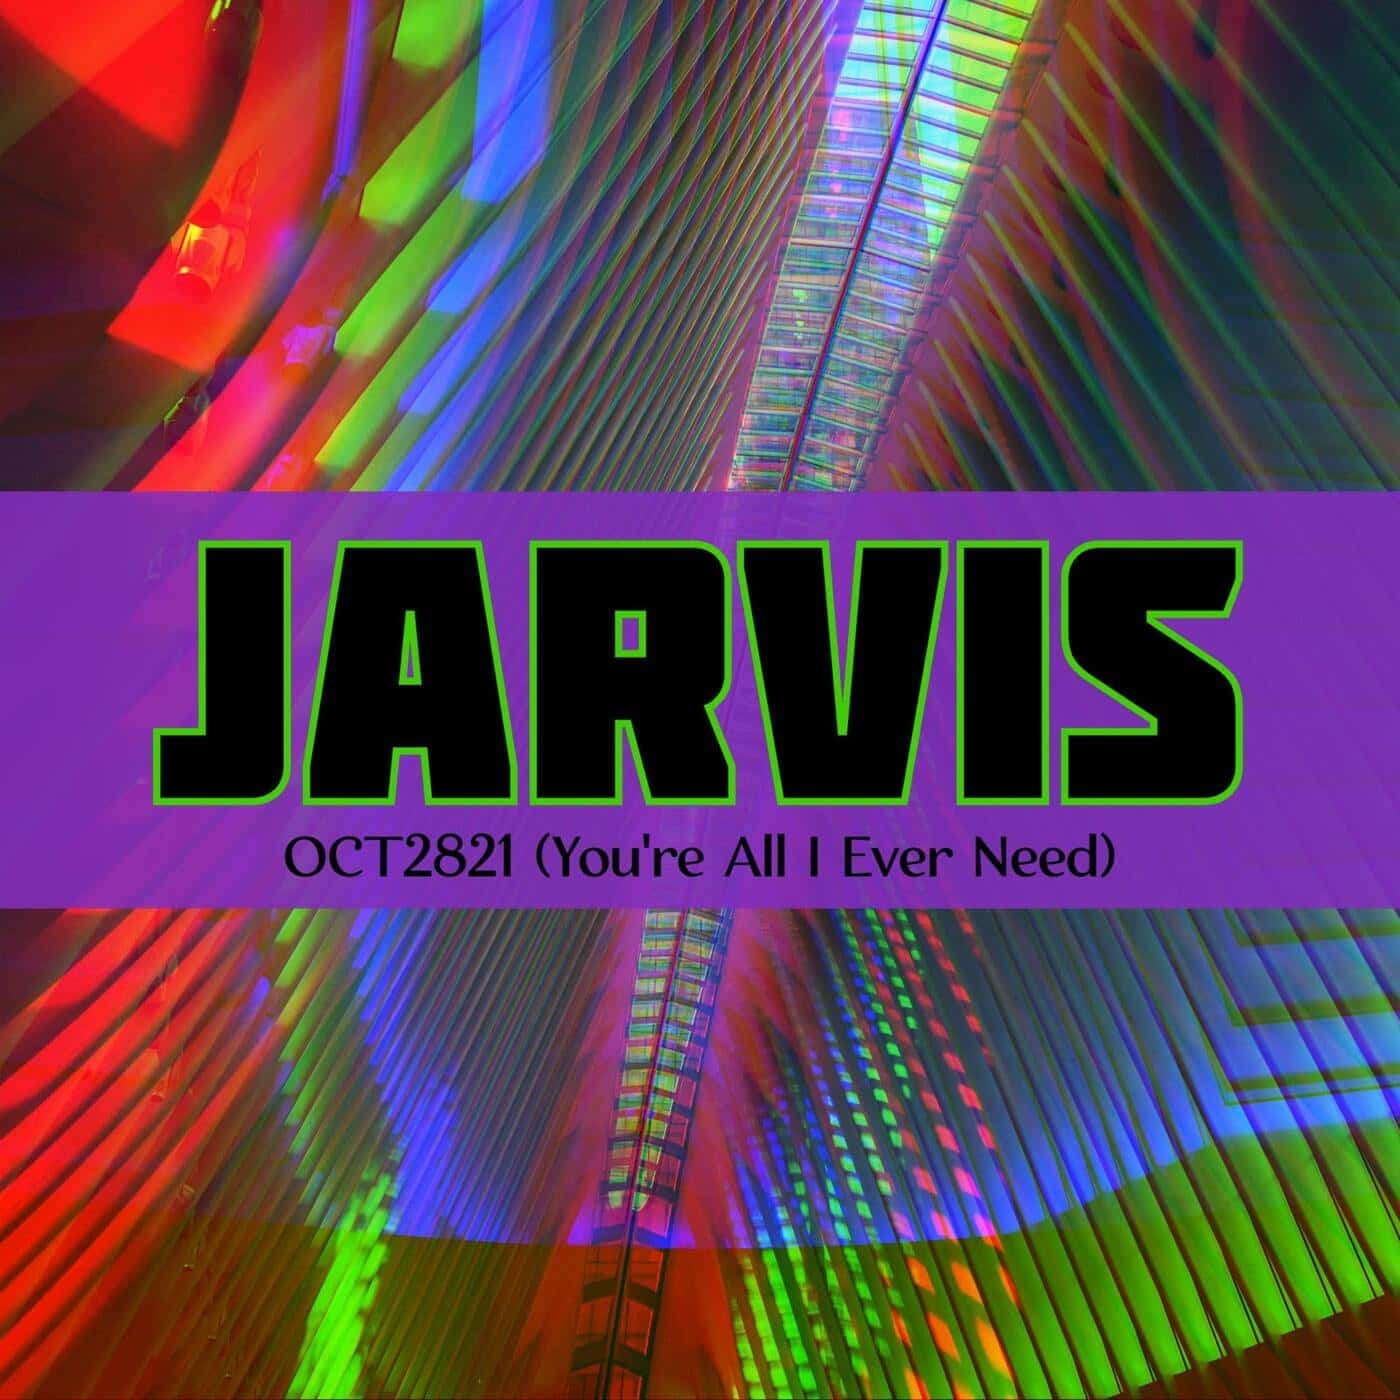 Download Jarvis - OCT2821 (You're All I Ever Need) on Electrobuzz